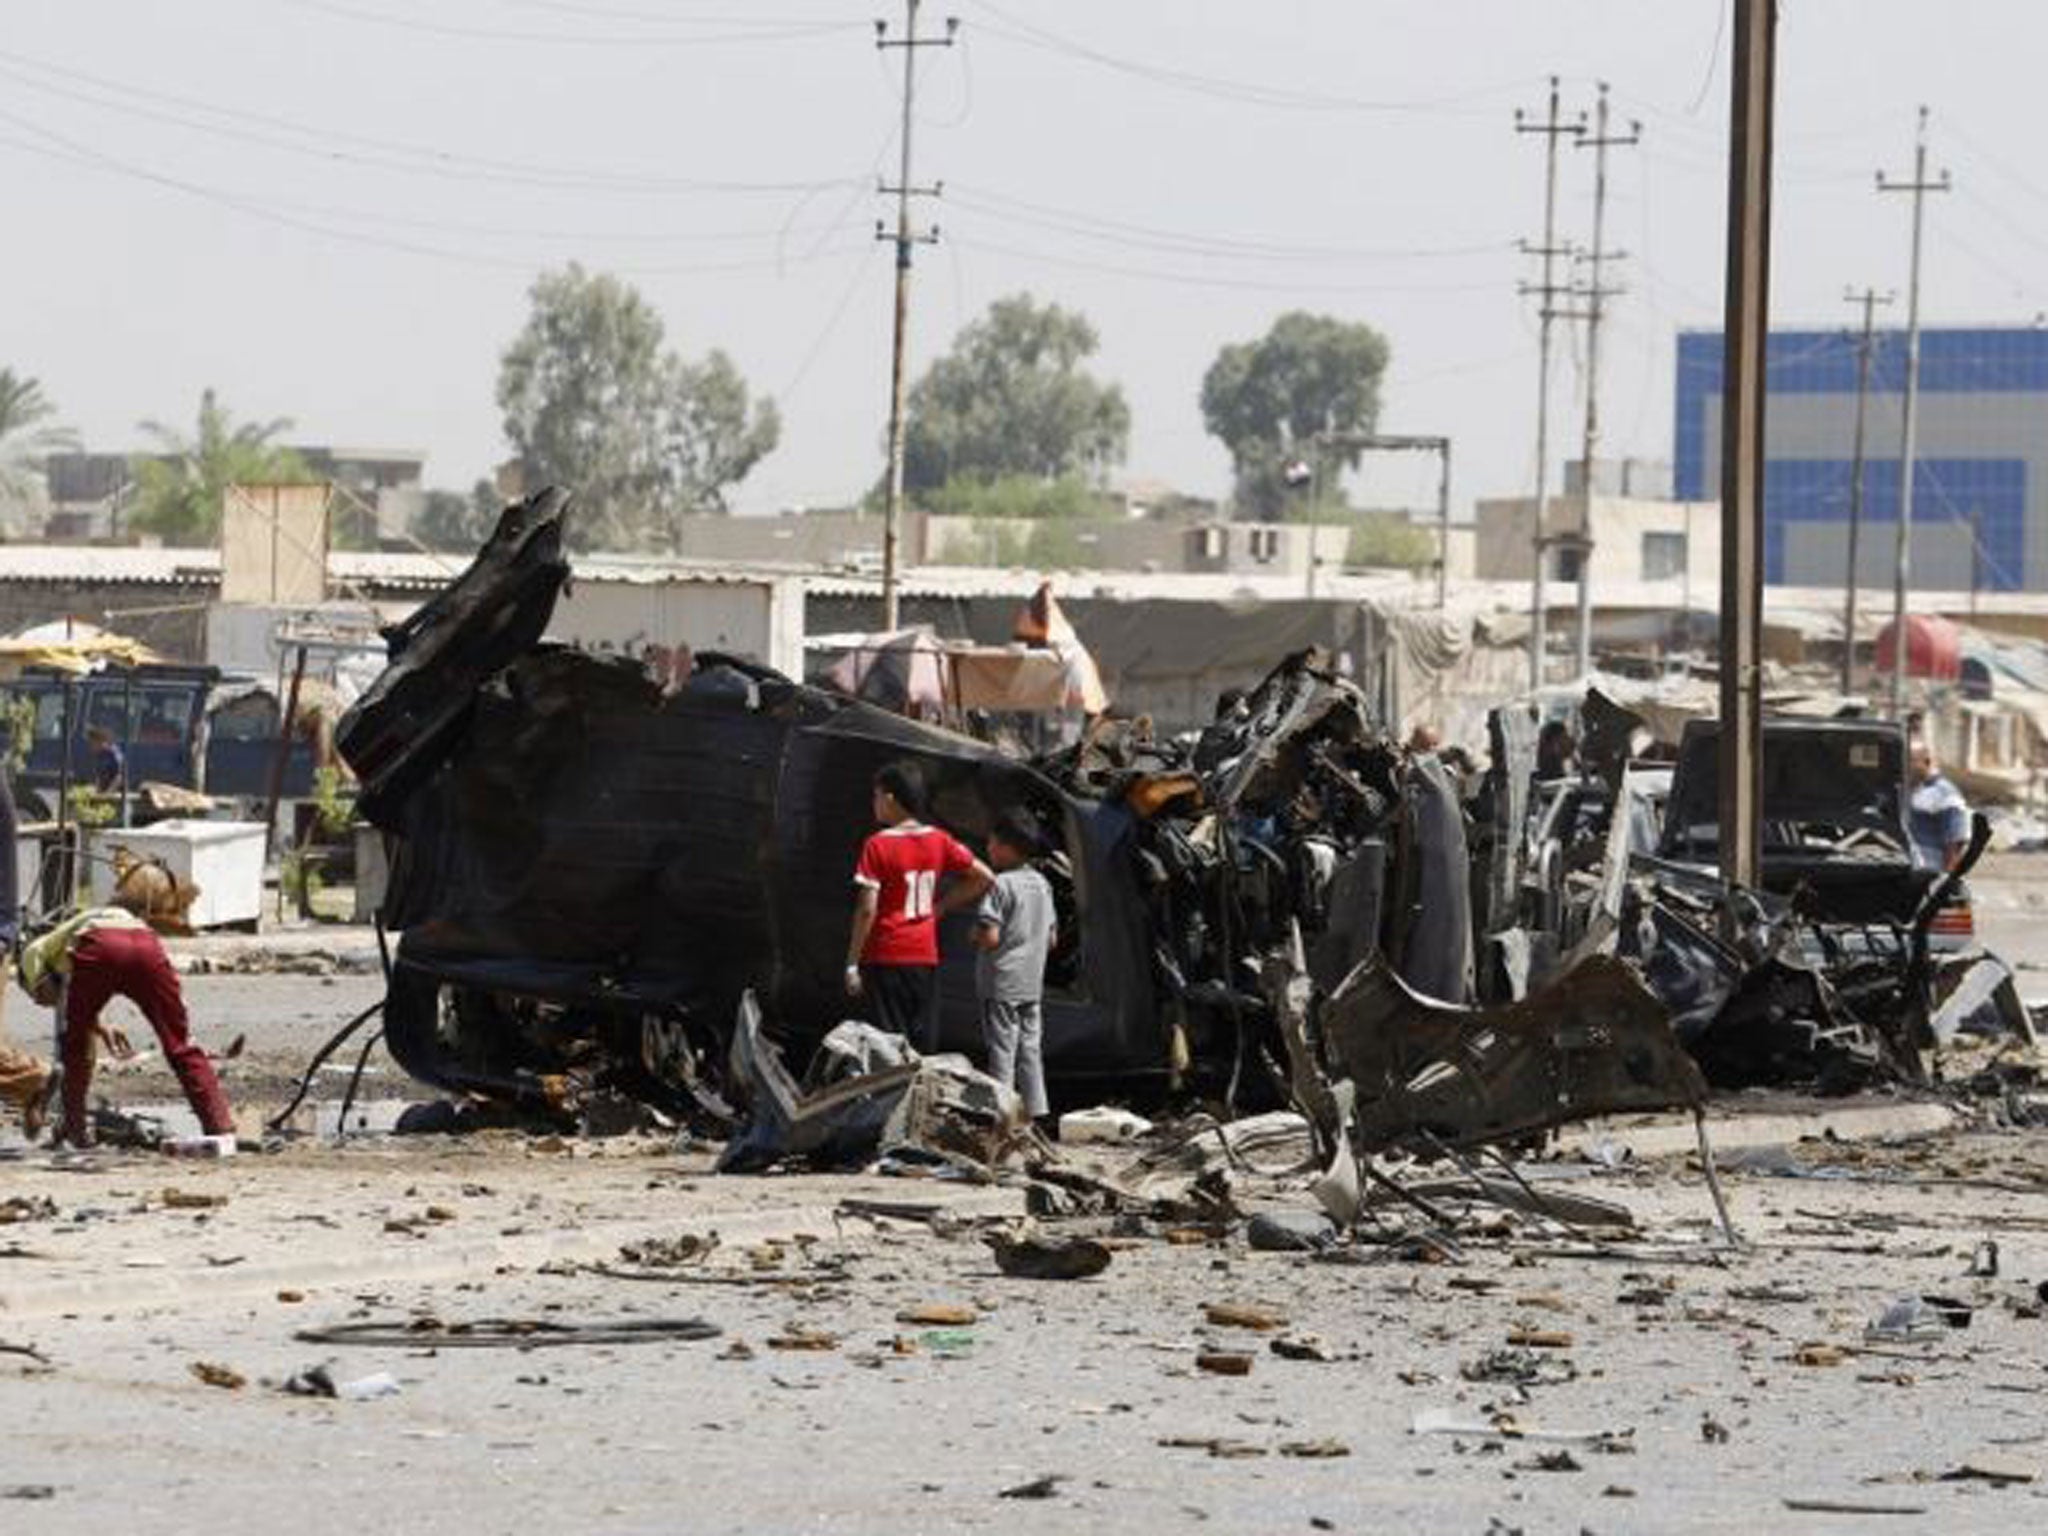 People gather at the site of a car bomb attack in Baghdad, 15 August, 2013. Five car bombs in Baghdad killed at least 23 people on Thursday and wounded more than 80, Iraqi police sources said.